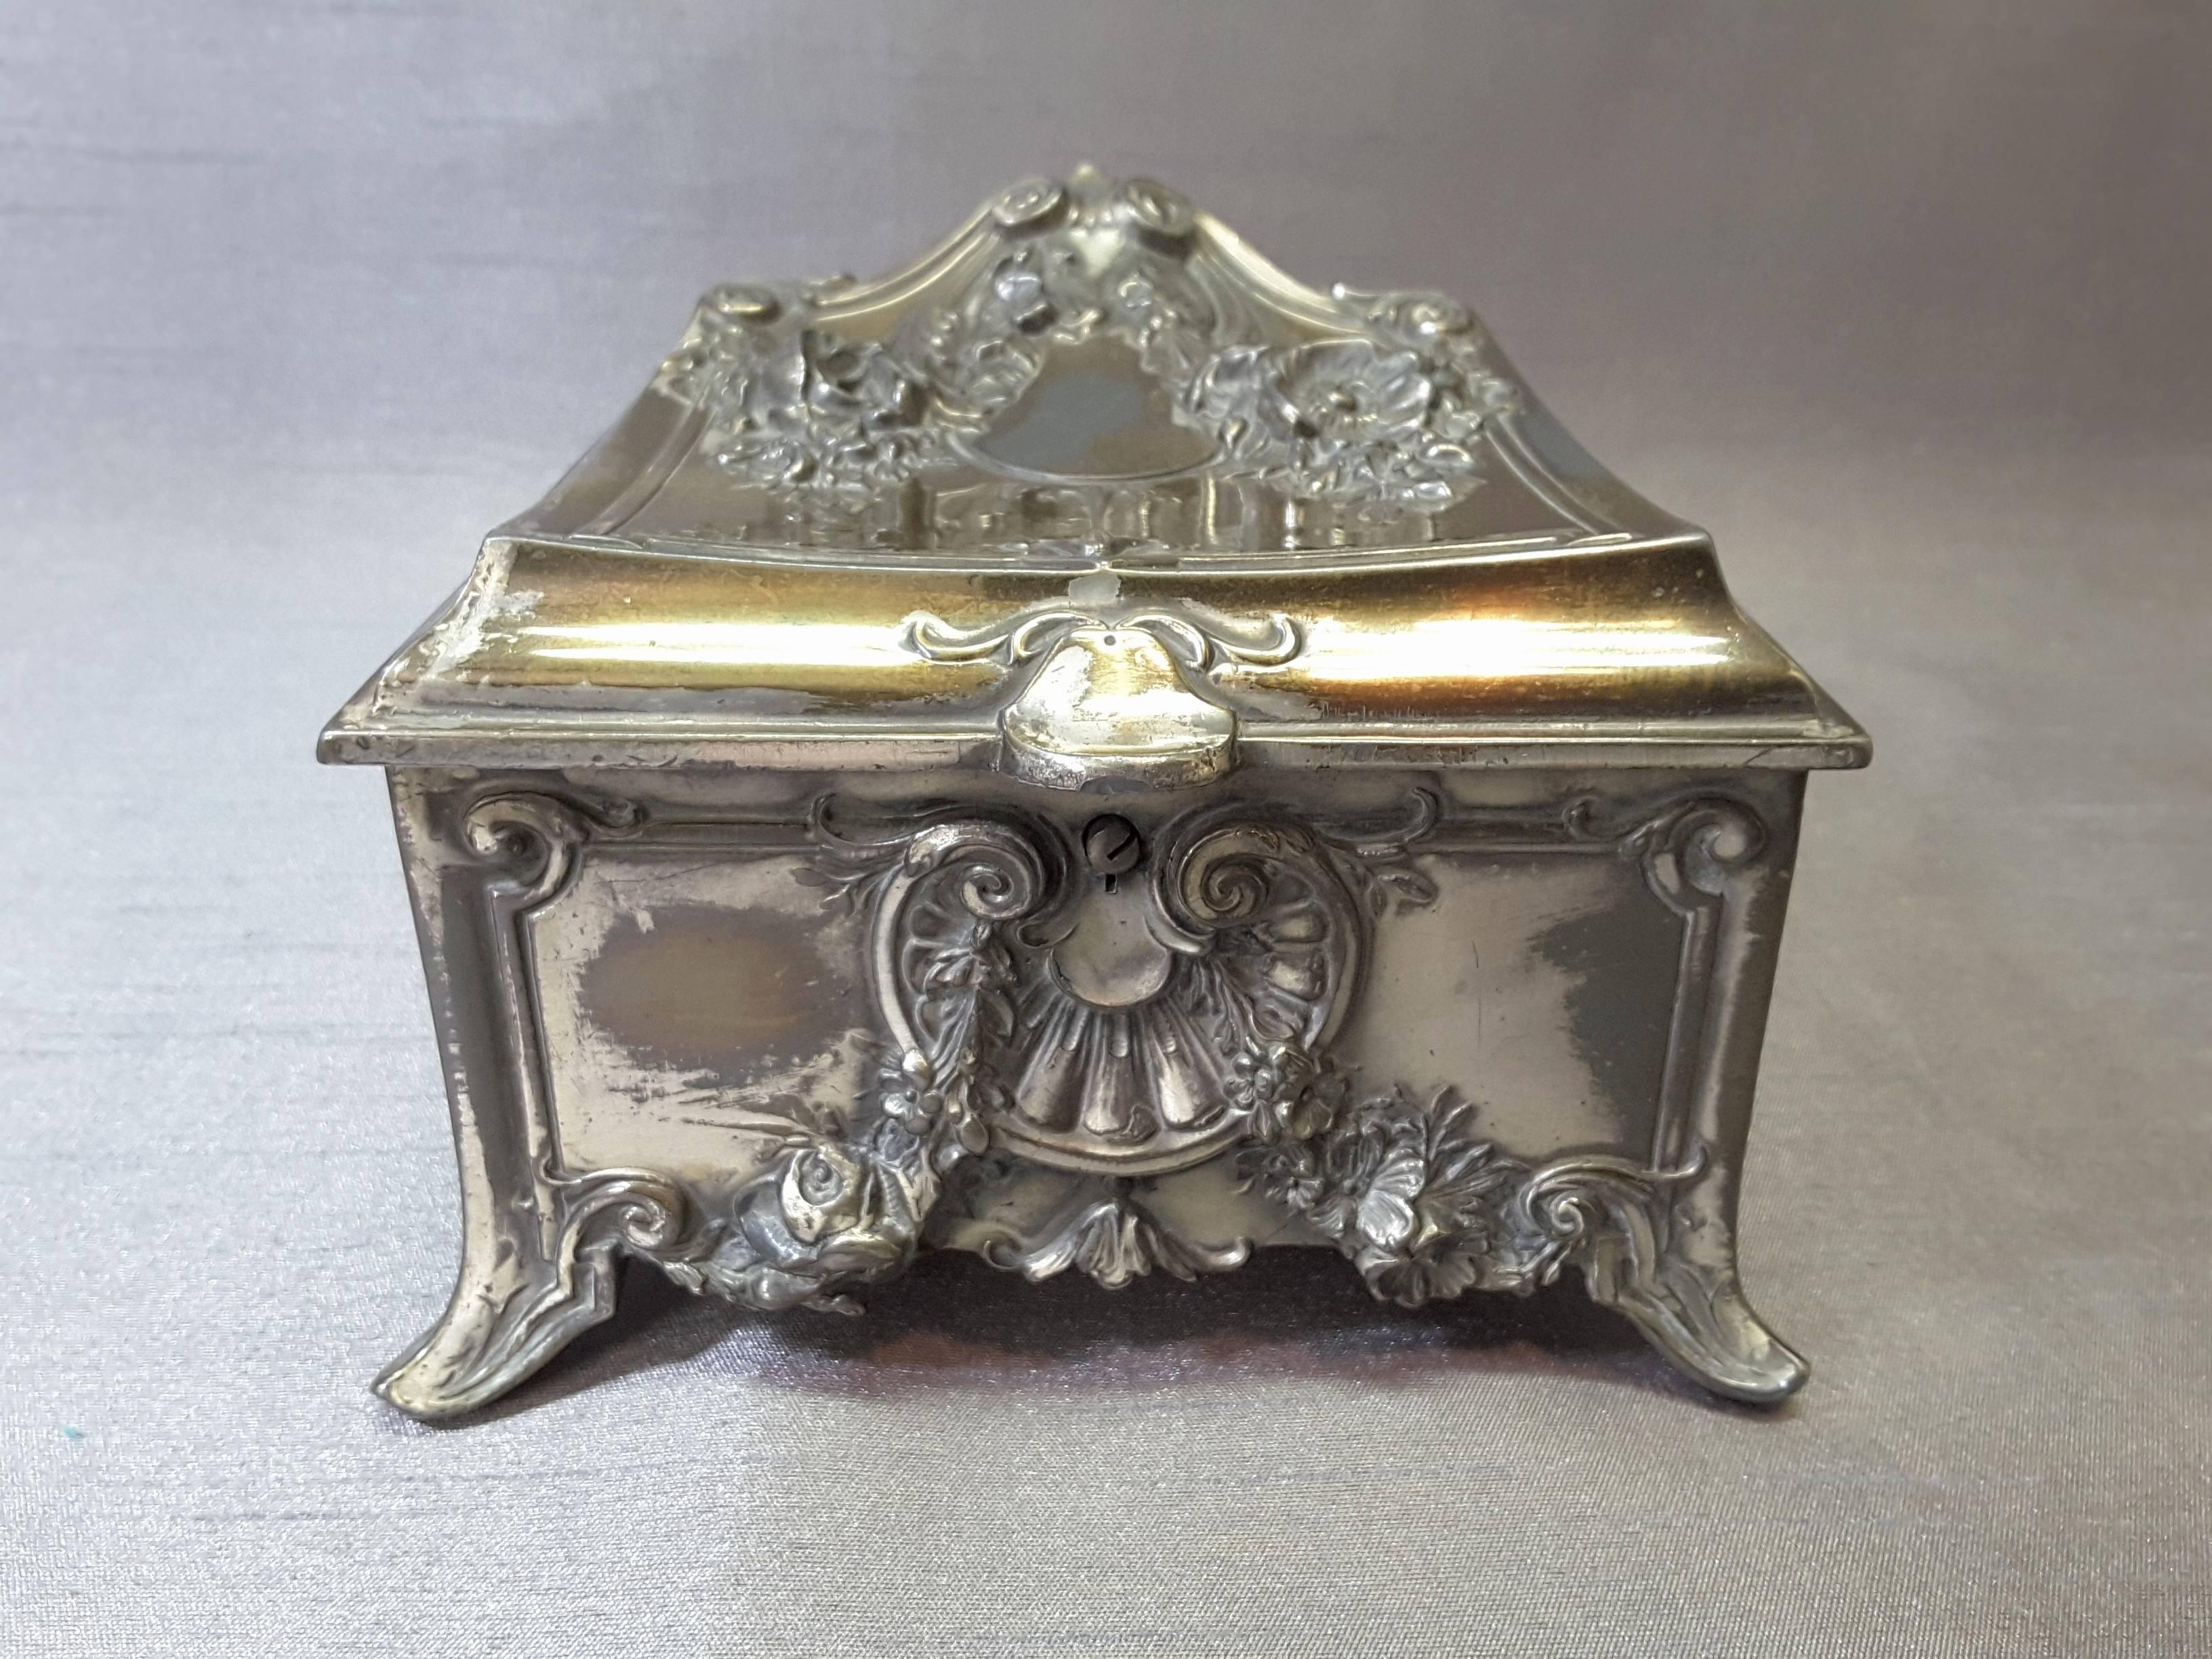  Art Nouveau Pewter Jewelry Caskets by W.B. Mfg. Co./Weidlich Bros. For Sale 5